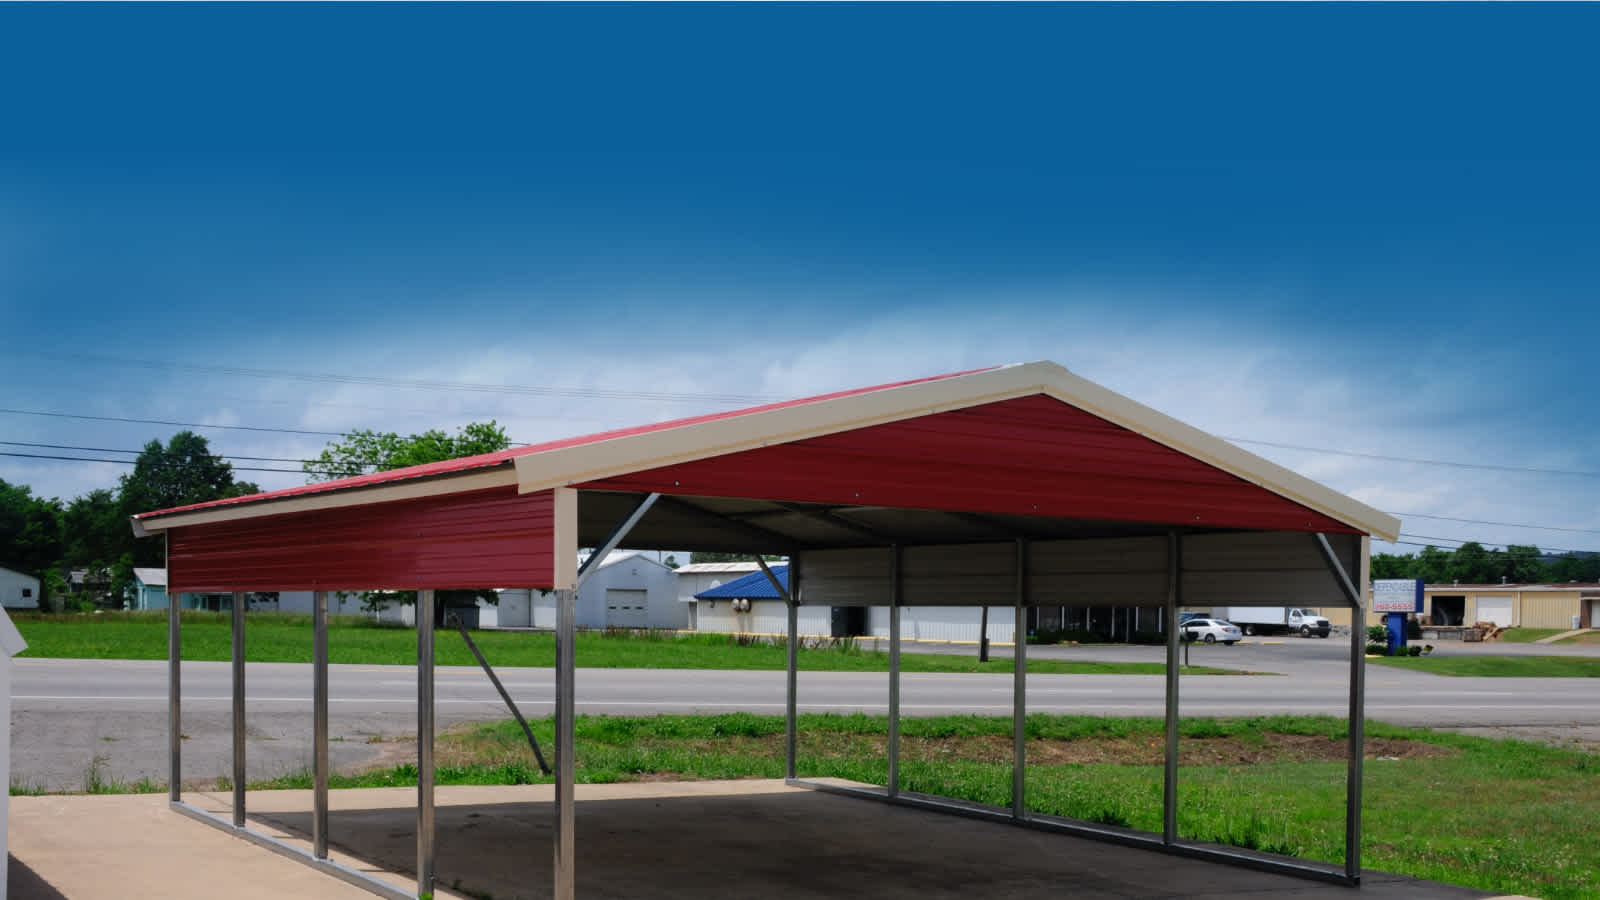 How Metal Carports Are Best For All Weather Conditions?